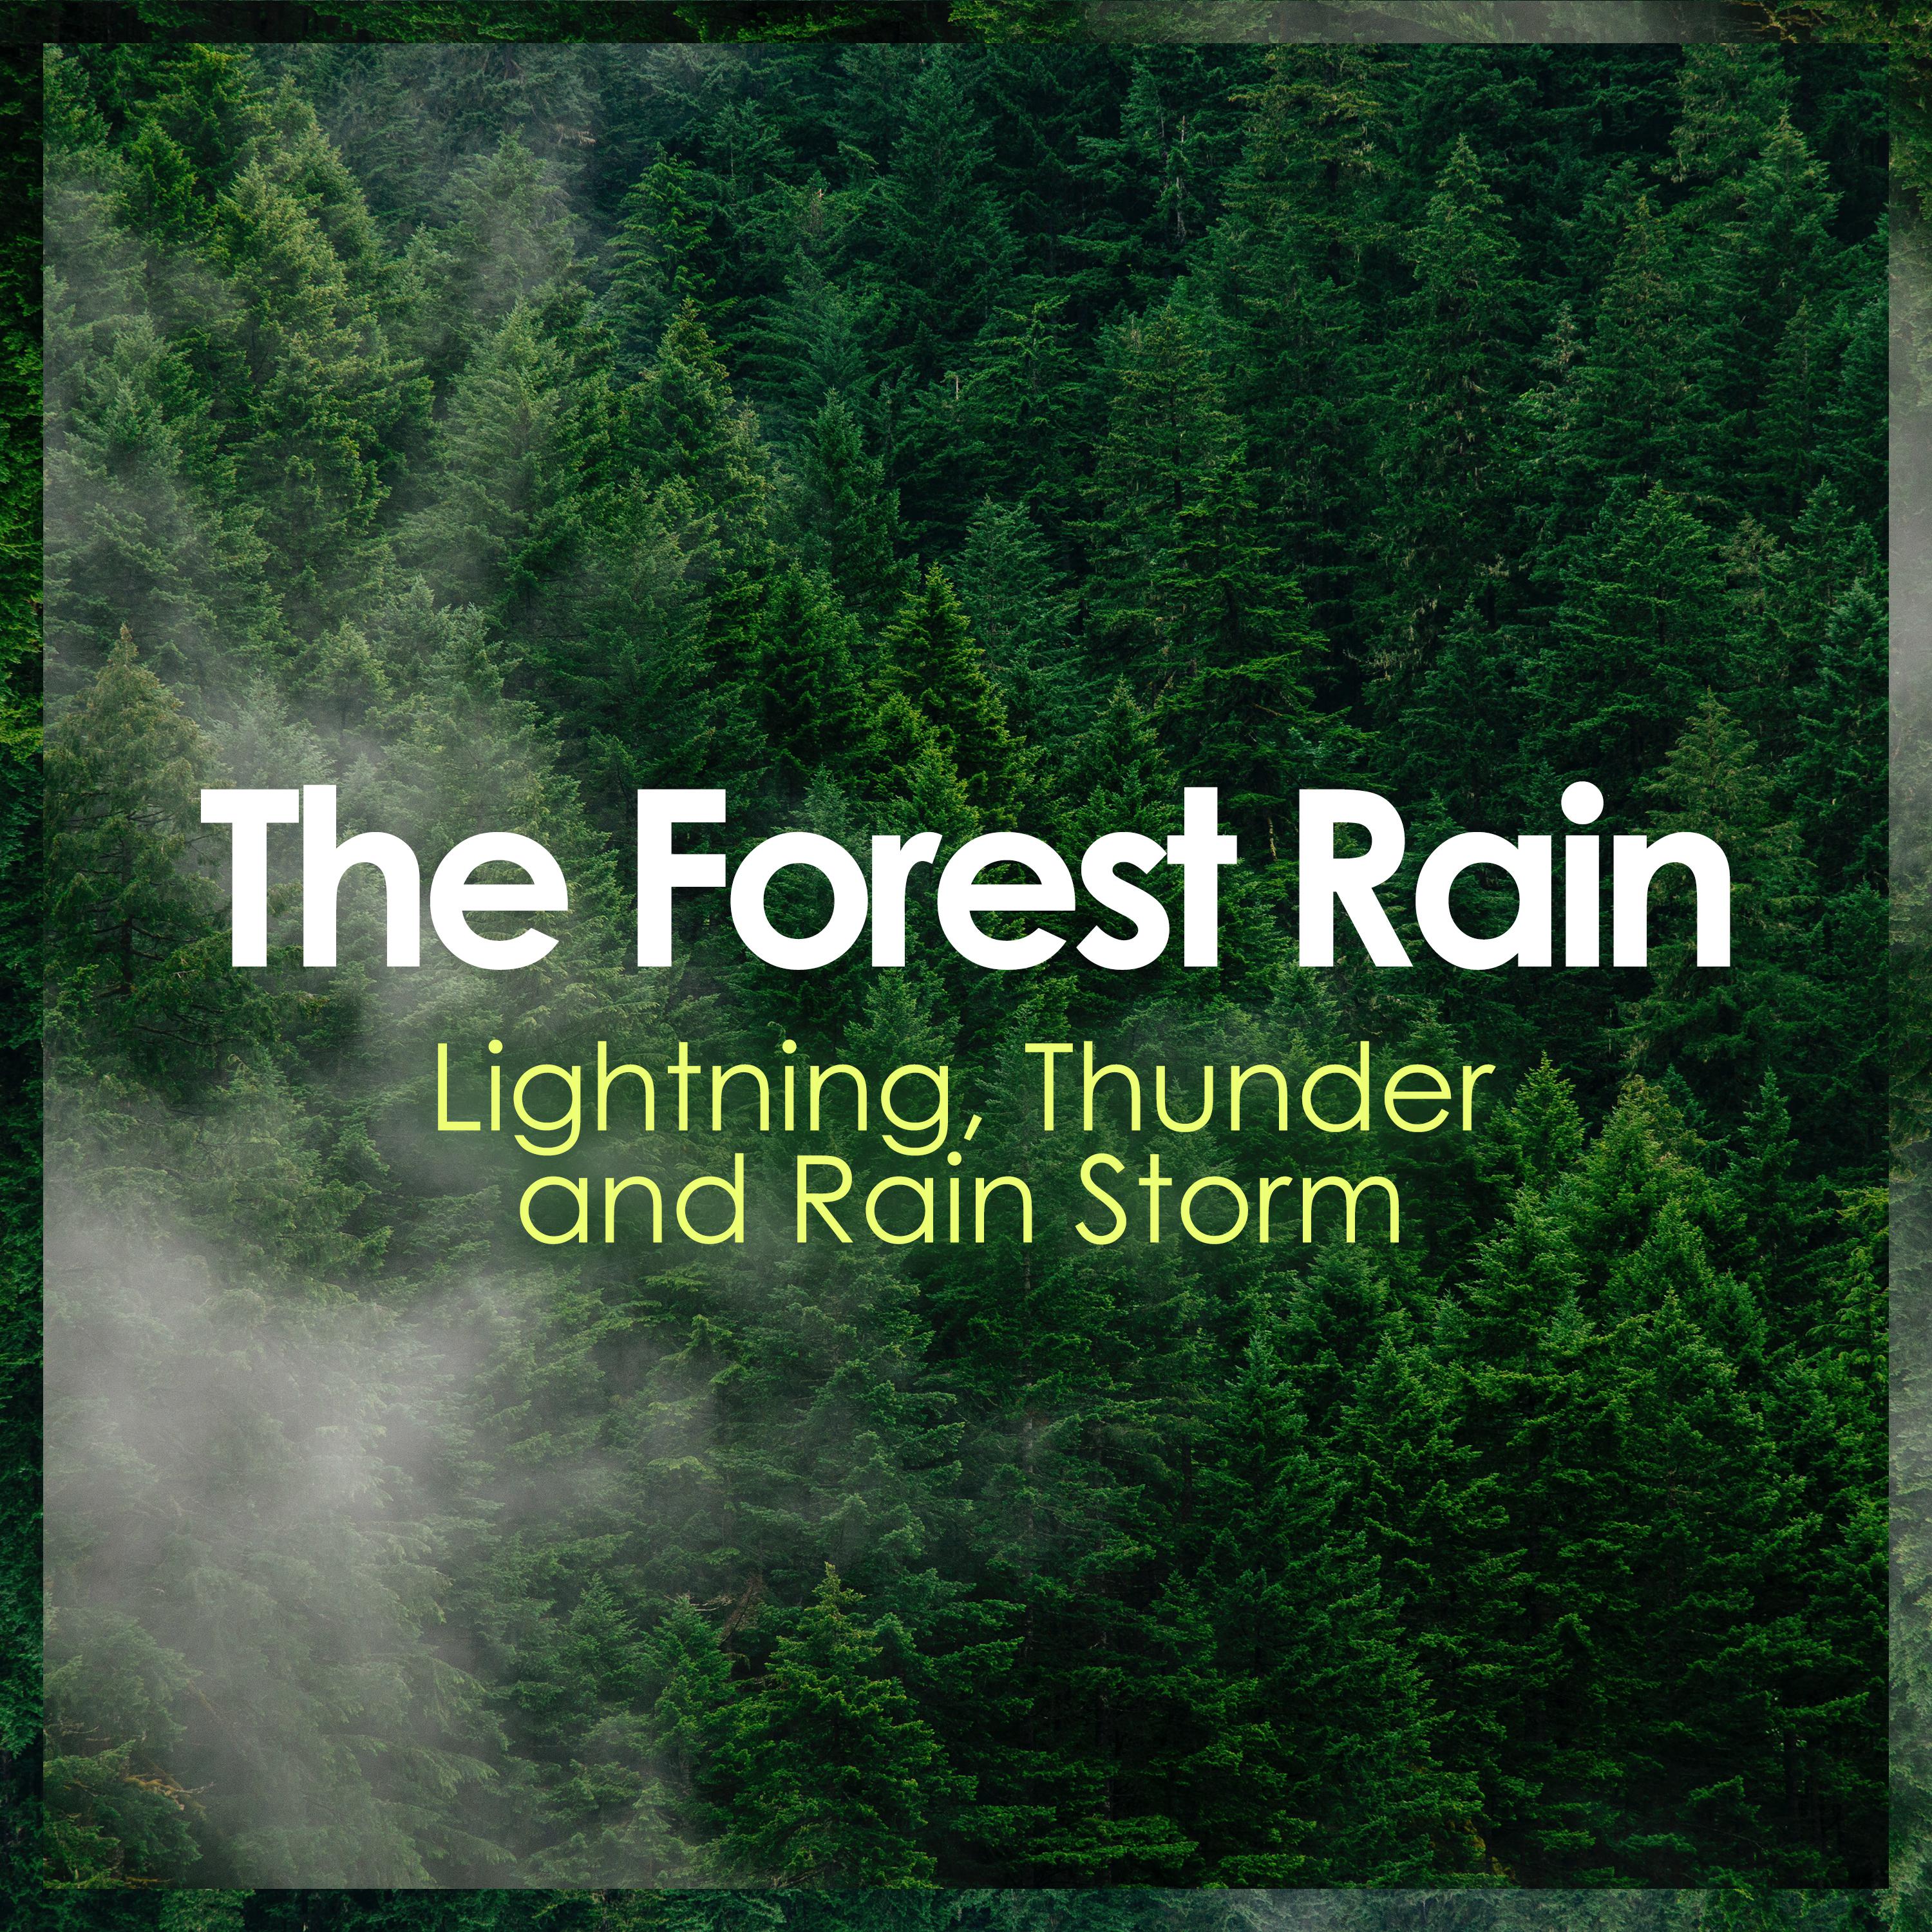 The Forest Rain